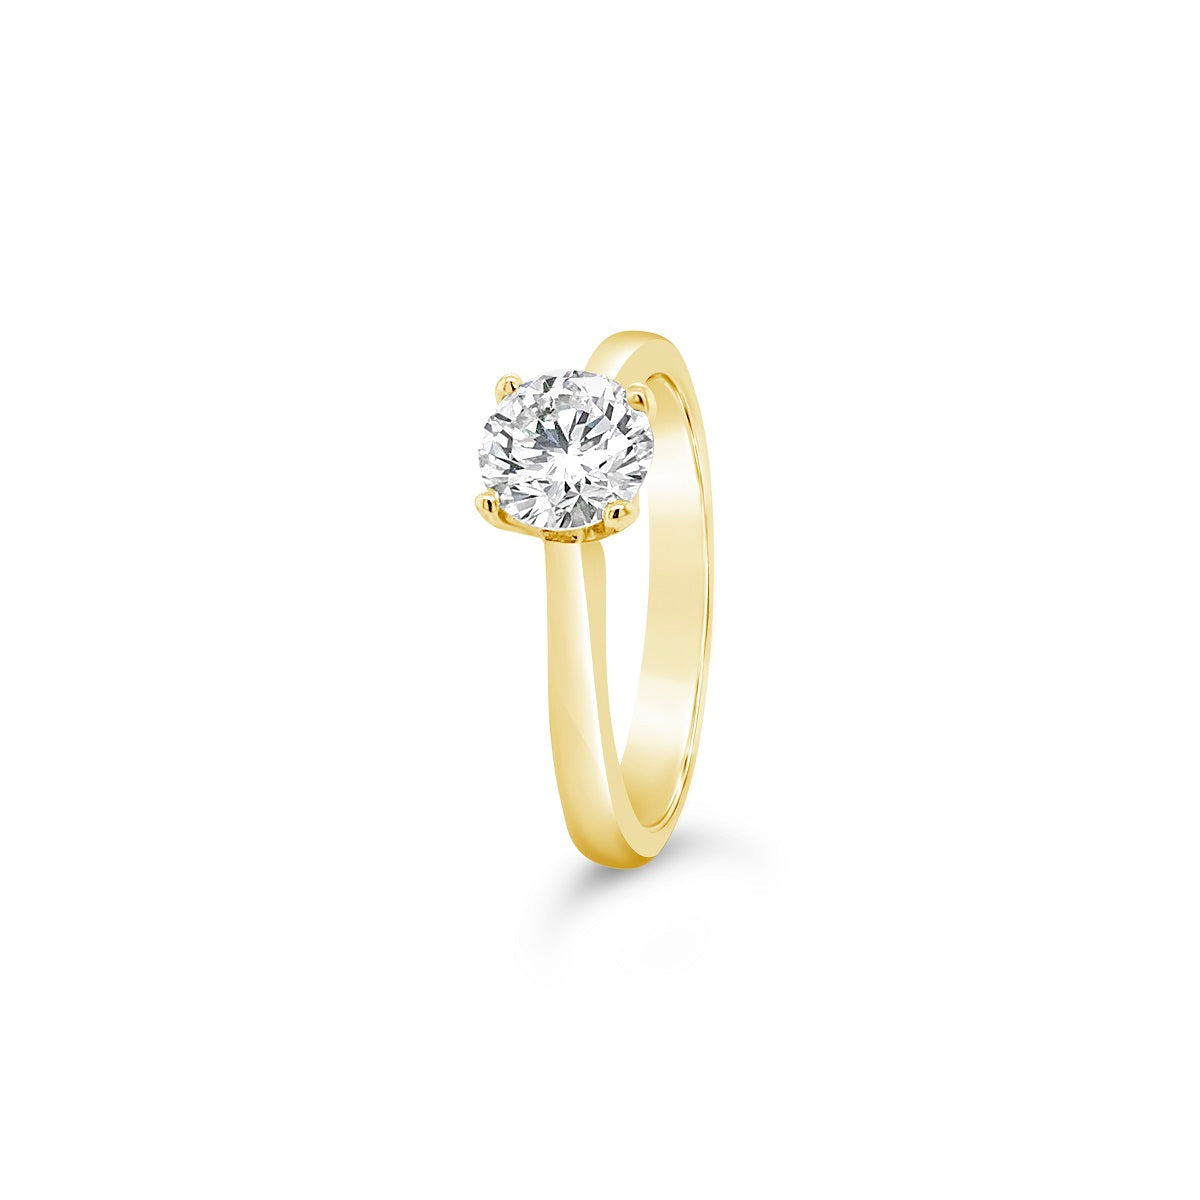 Phoebe Solitaire Goddess Engagement Ring